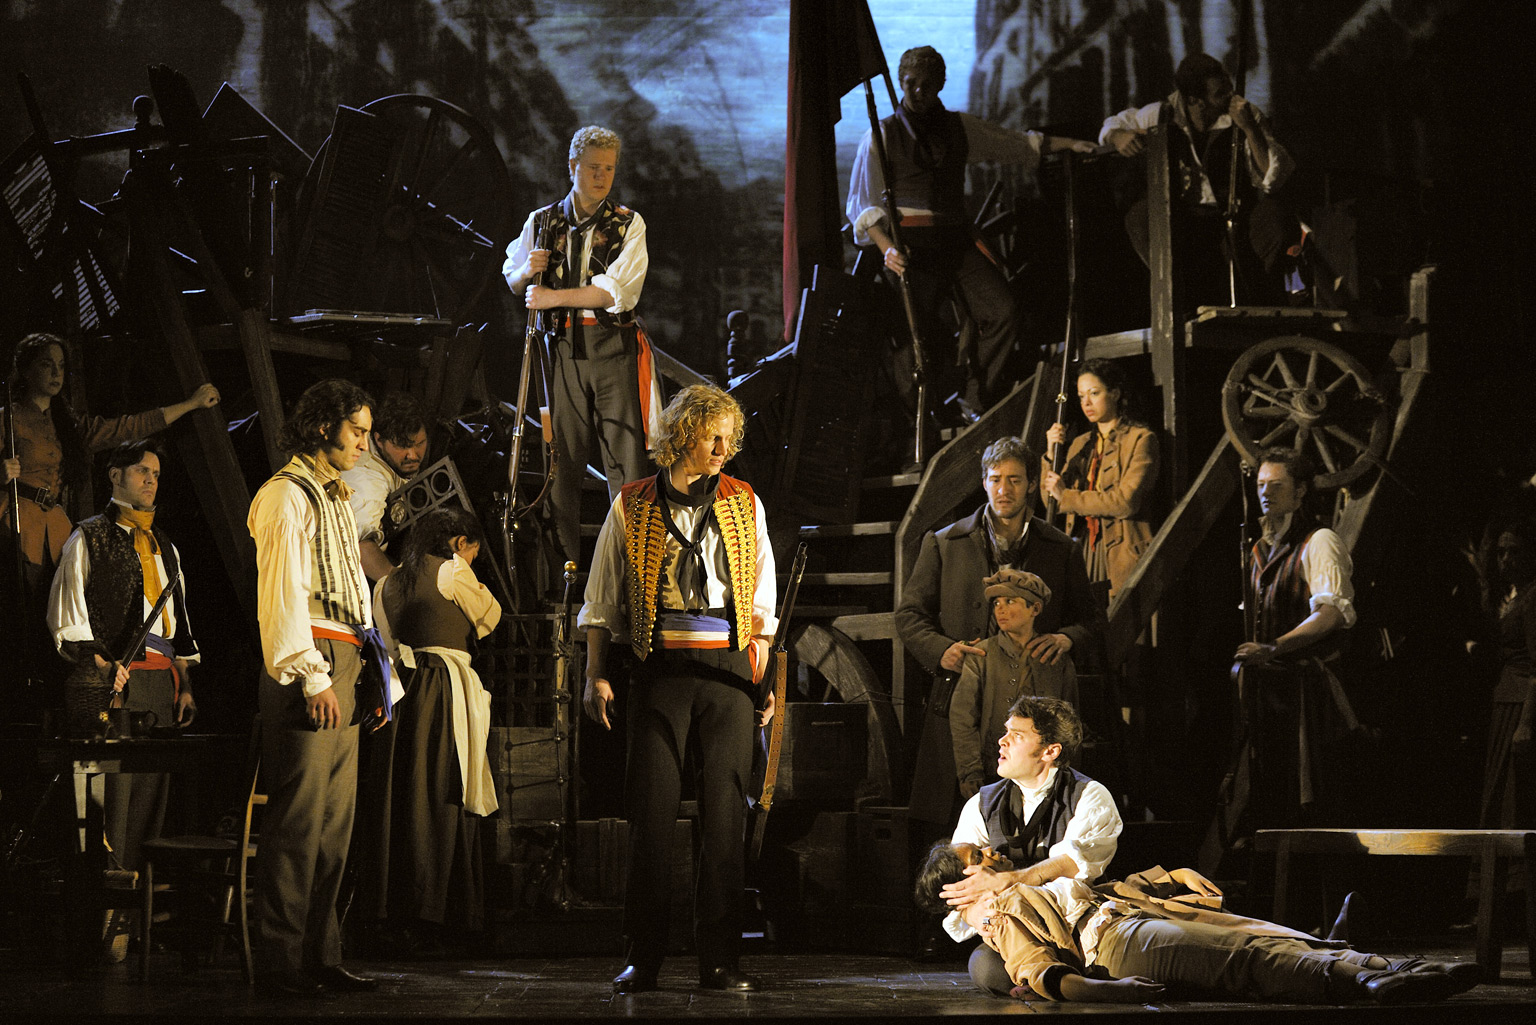 Les miserables the musical